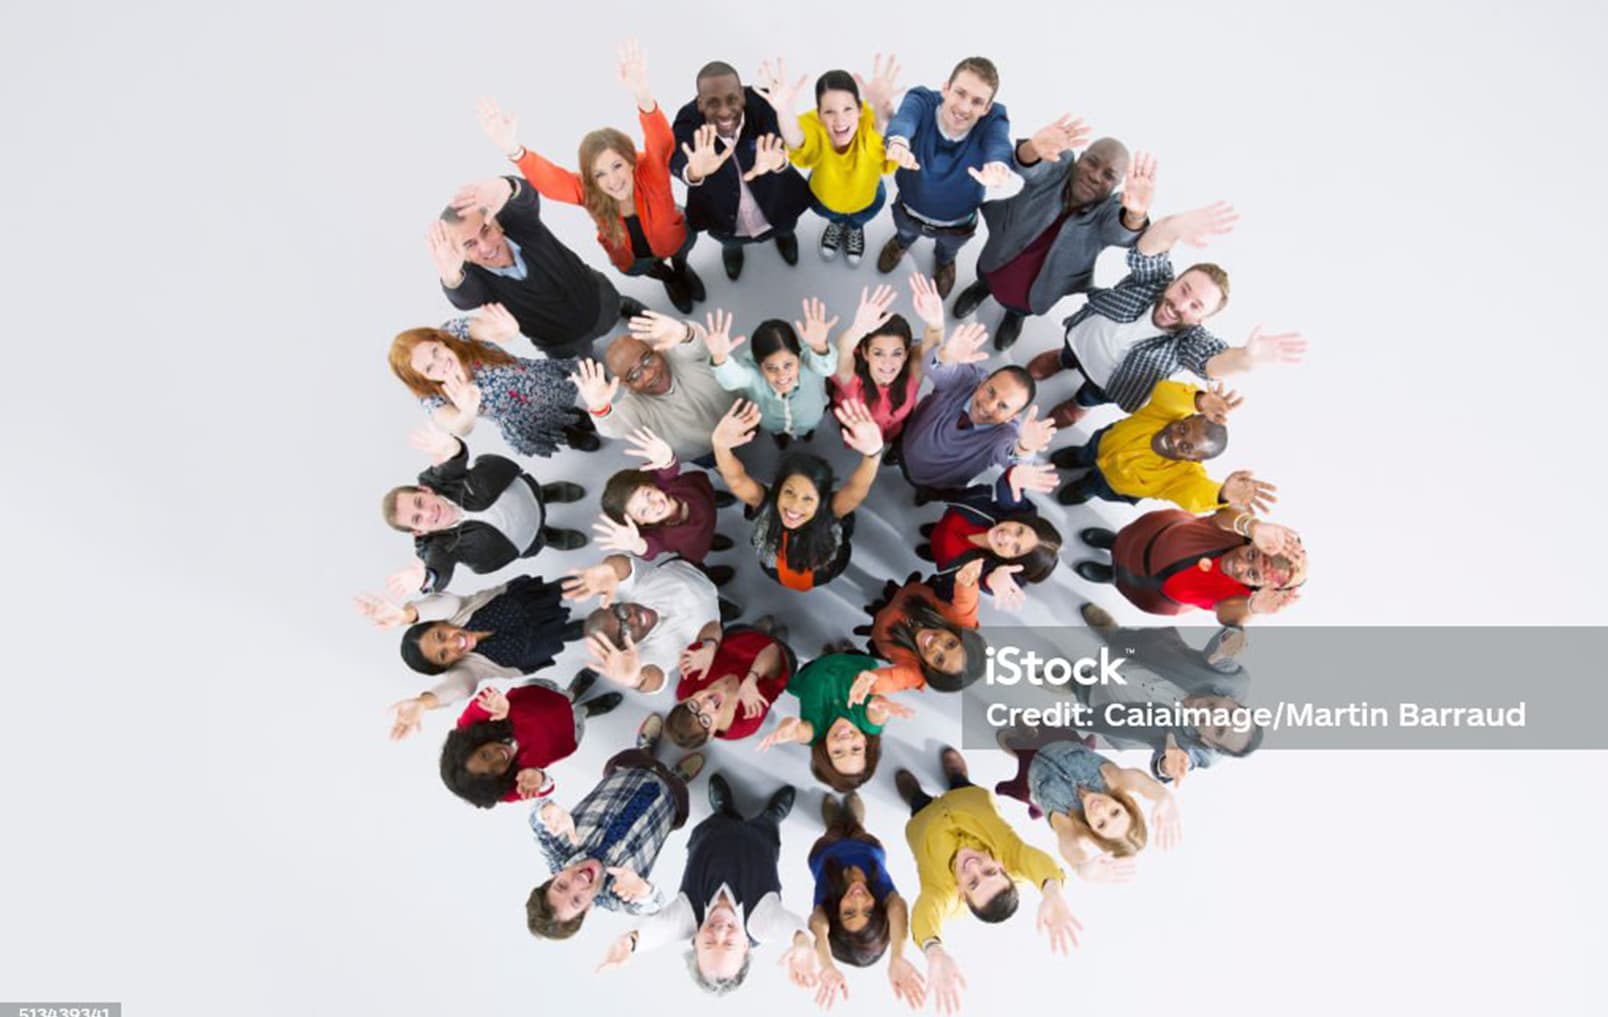 stock-photo-group-of-volunteers-working-in-community-charity-donation-center-1998304451